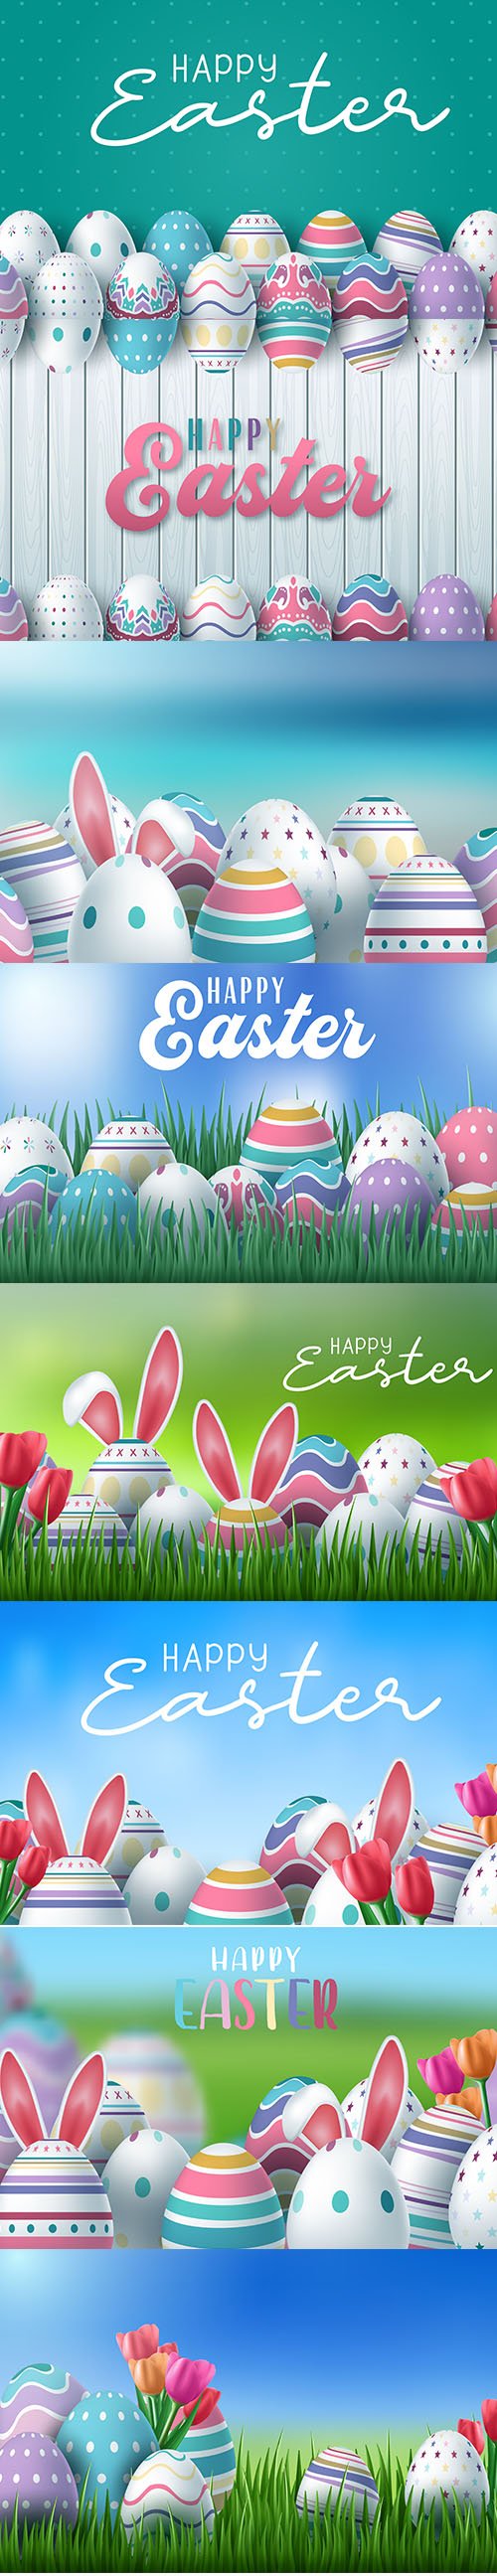 Happy Easter Background with Painted Egg